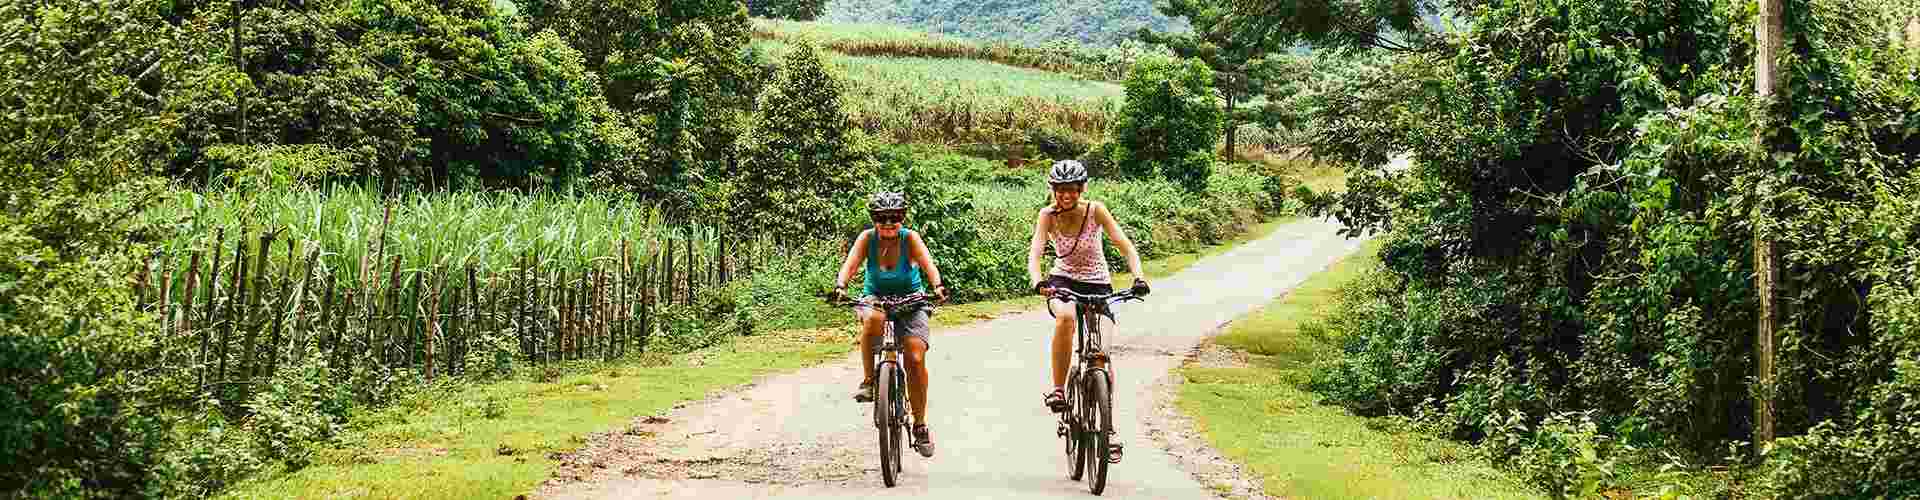 Two travellers cycling through the countryside in Vietnam